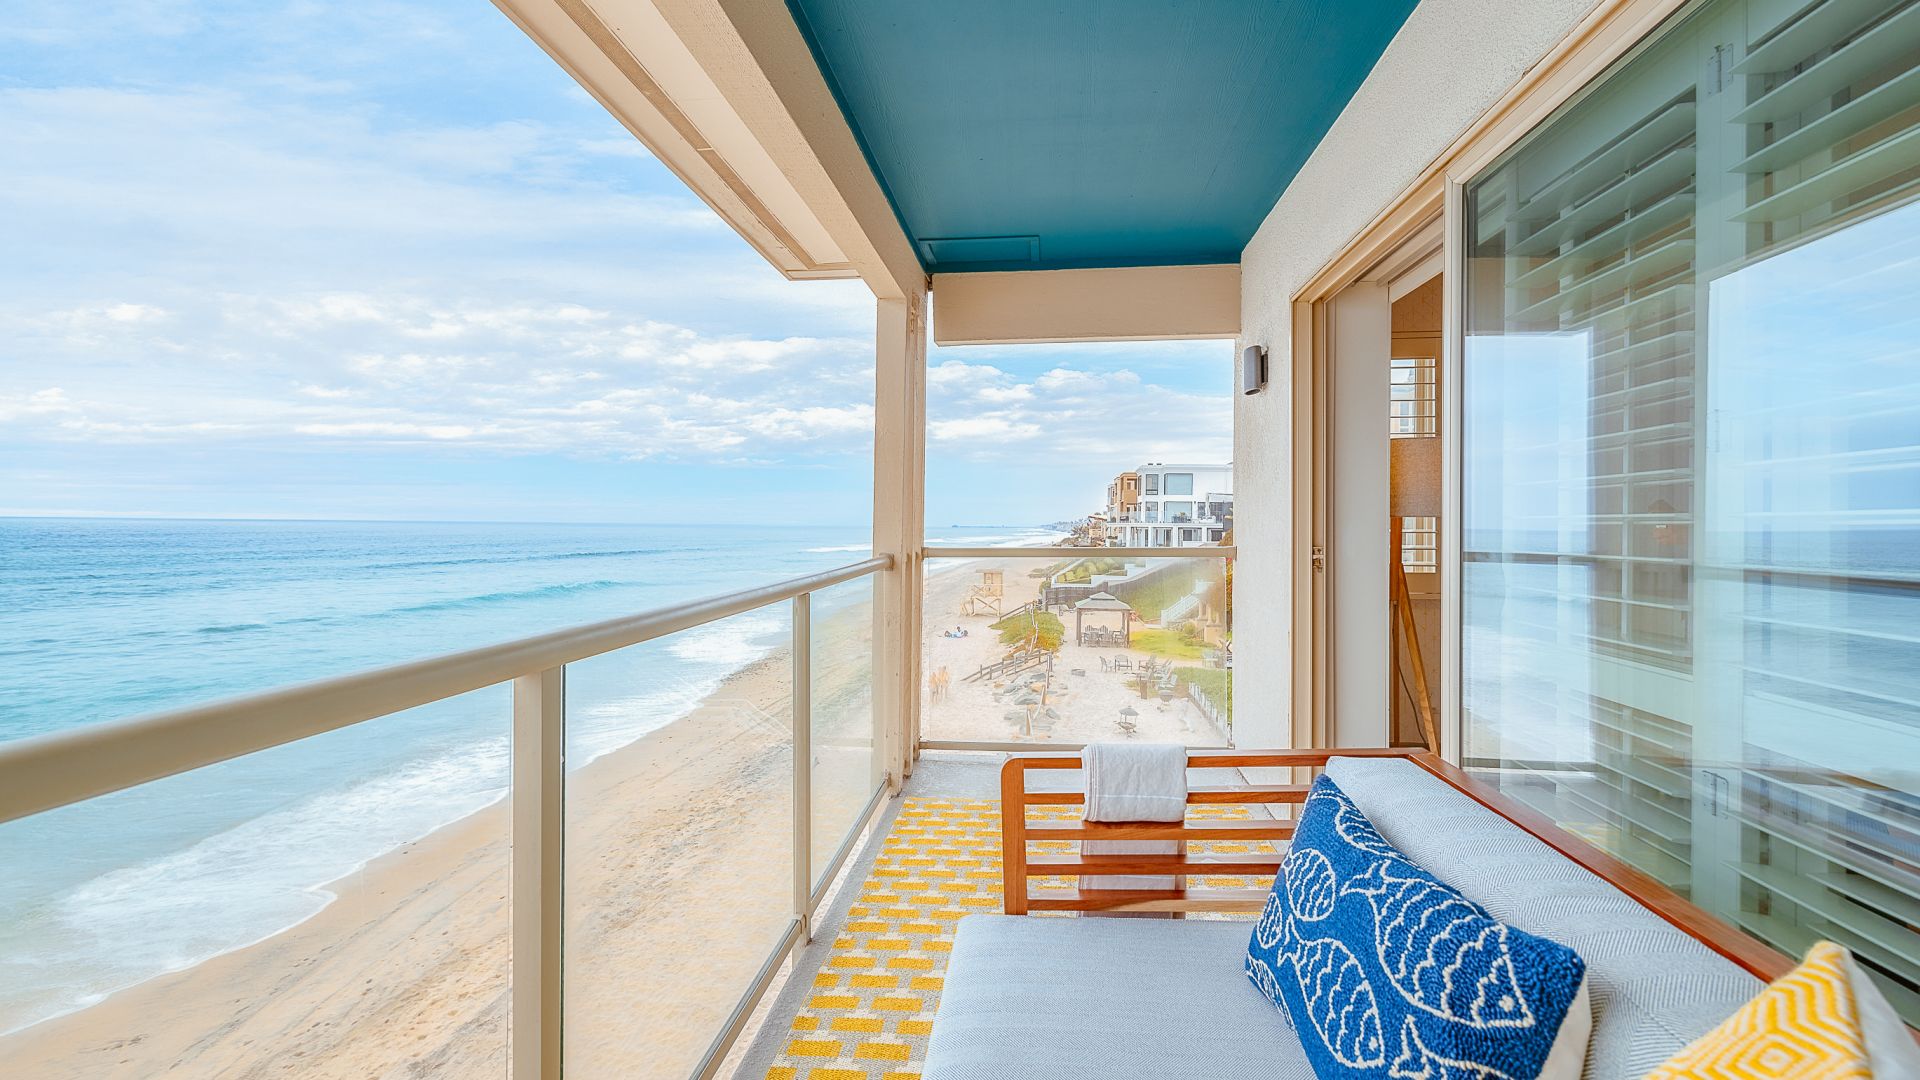 A Deck With A View Of The Ocean And A Beach